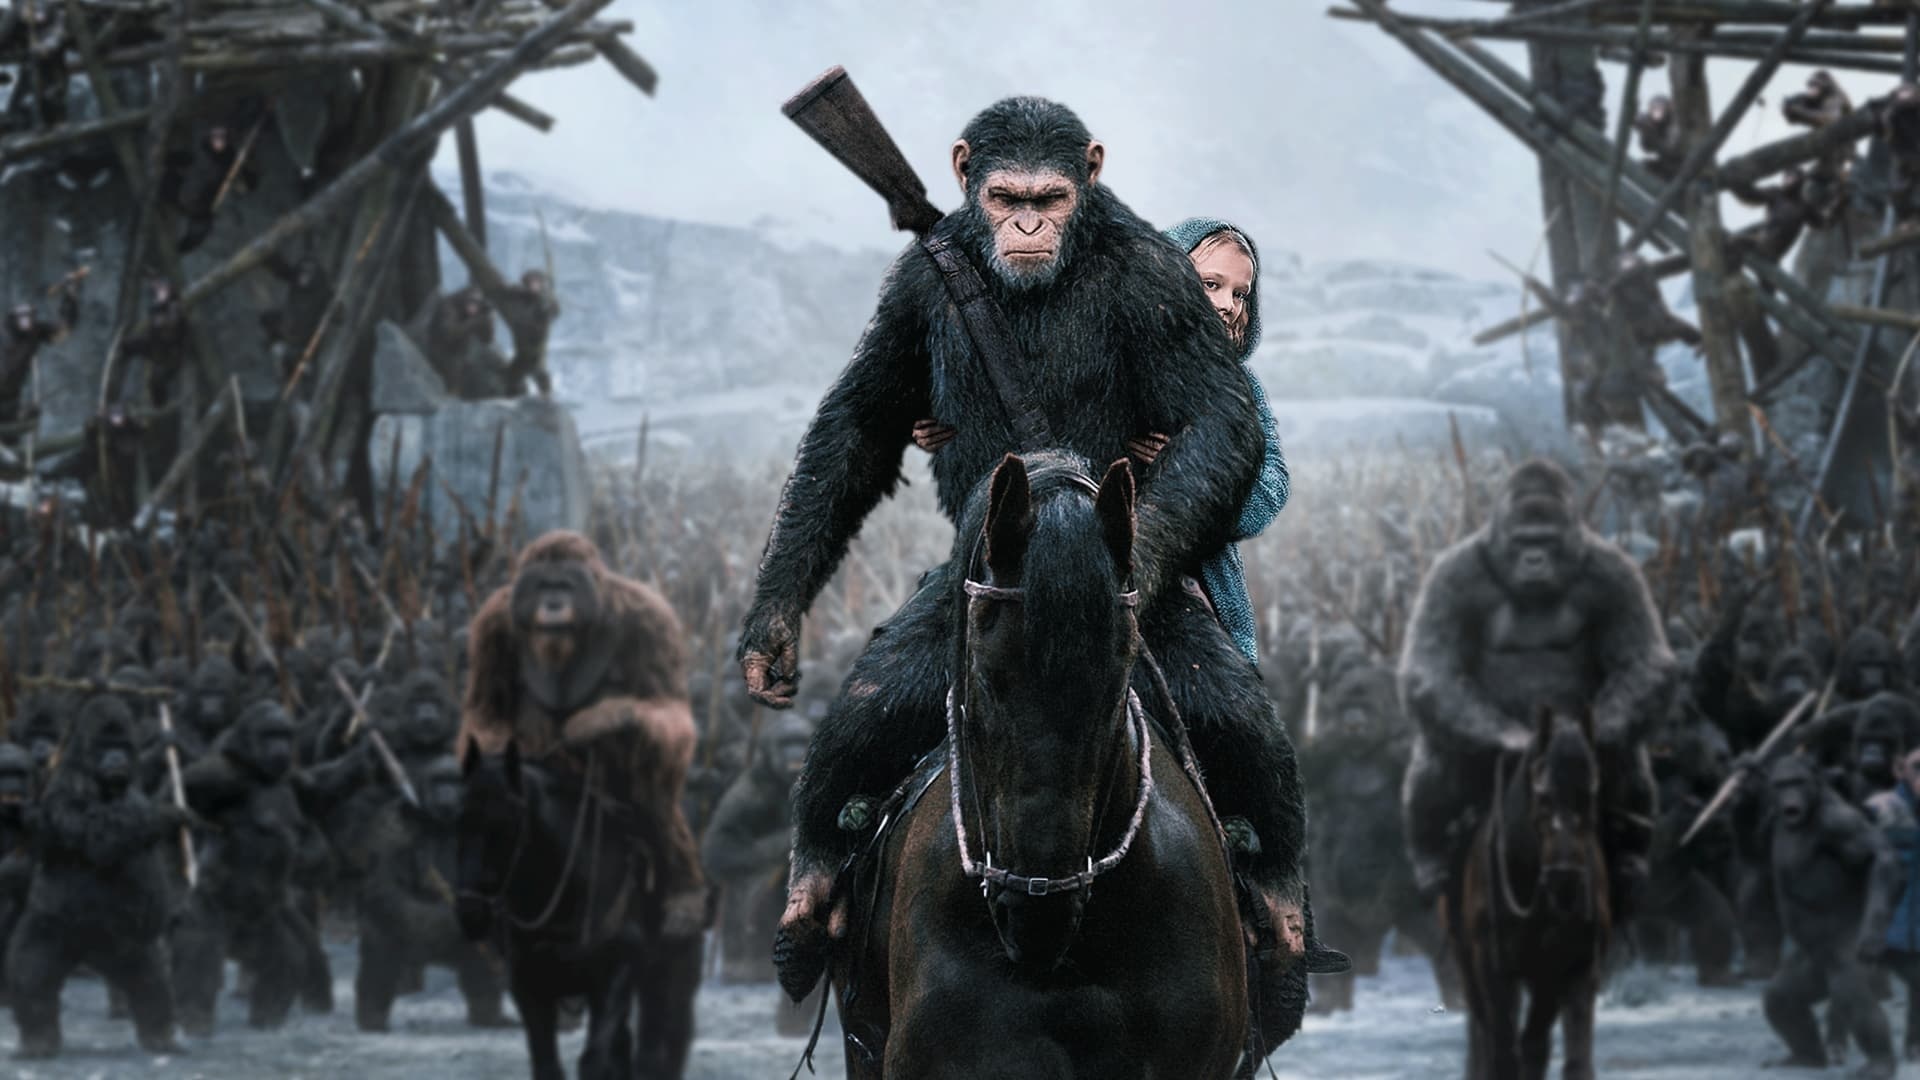 Planet of the Apes, Available on demand, Watch the epic, Apes versus humans, 1920x1080 Full HD Desktop